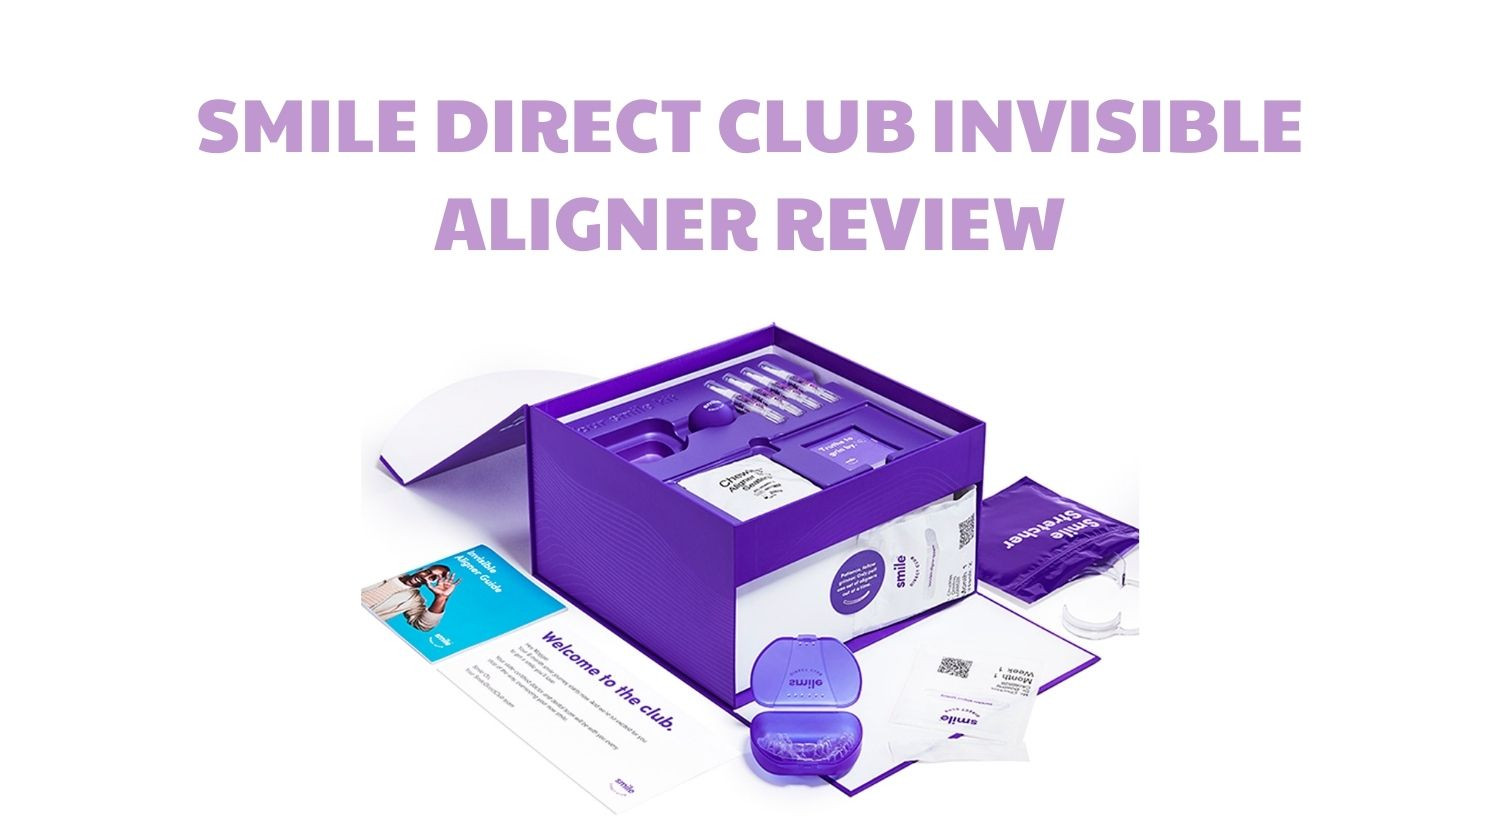 Smile Direct Club Invisible Aligner Review|Smiling is Contagious